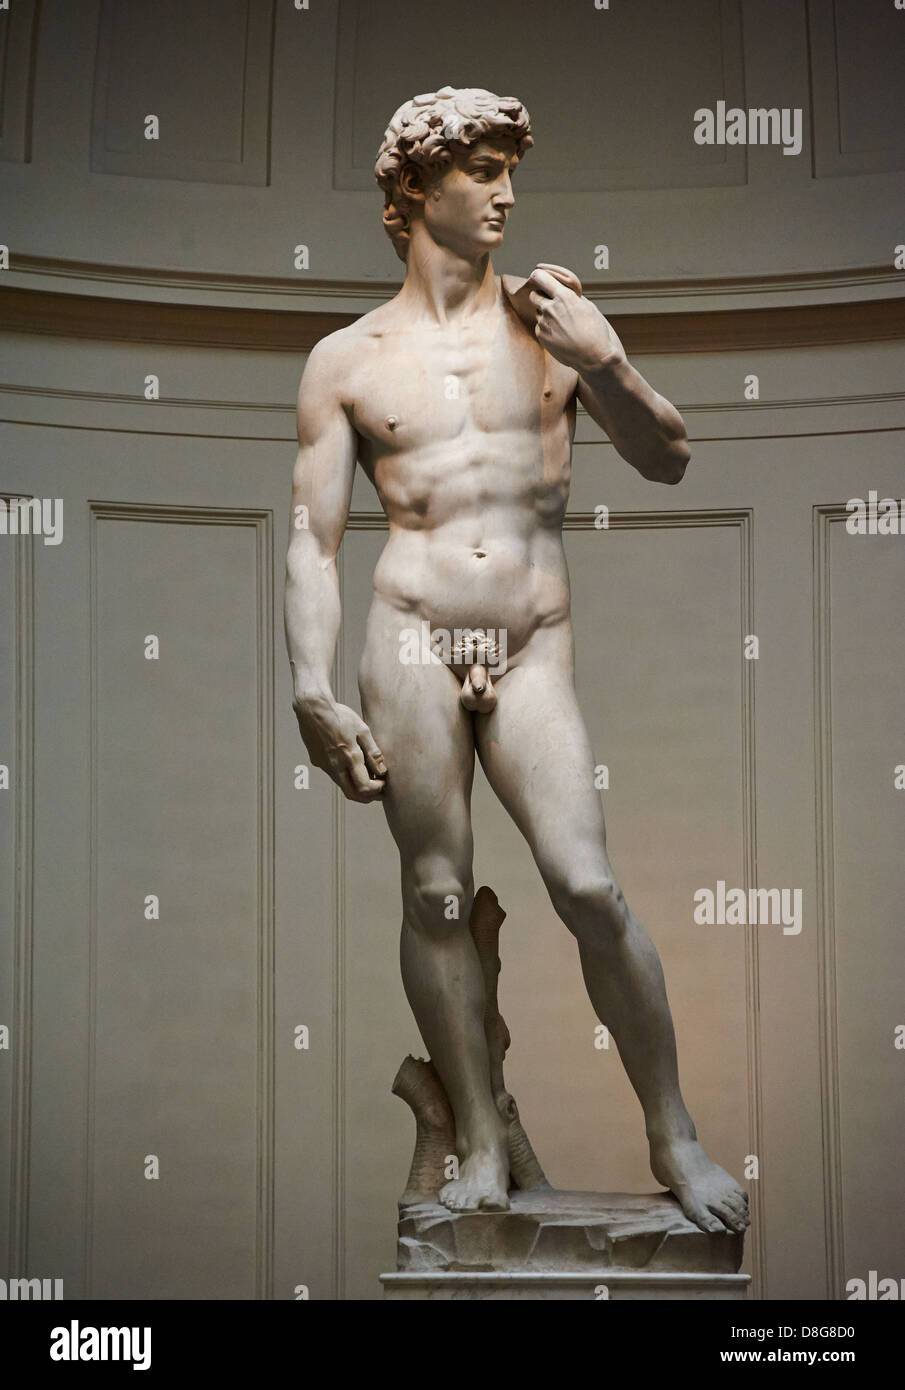 Europe, Italy, Florence, Accademia di Belle Arti, David by Michelangelo at the Galleria dell'Accademia UNESCO Stock Photo